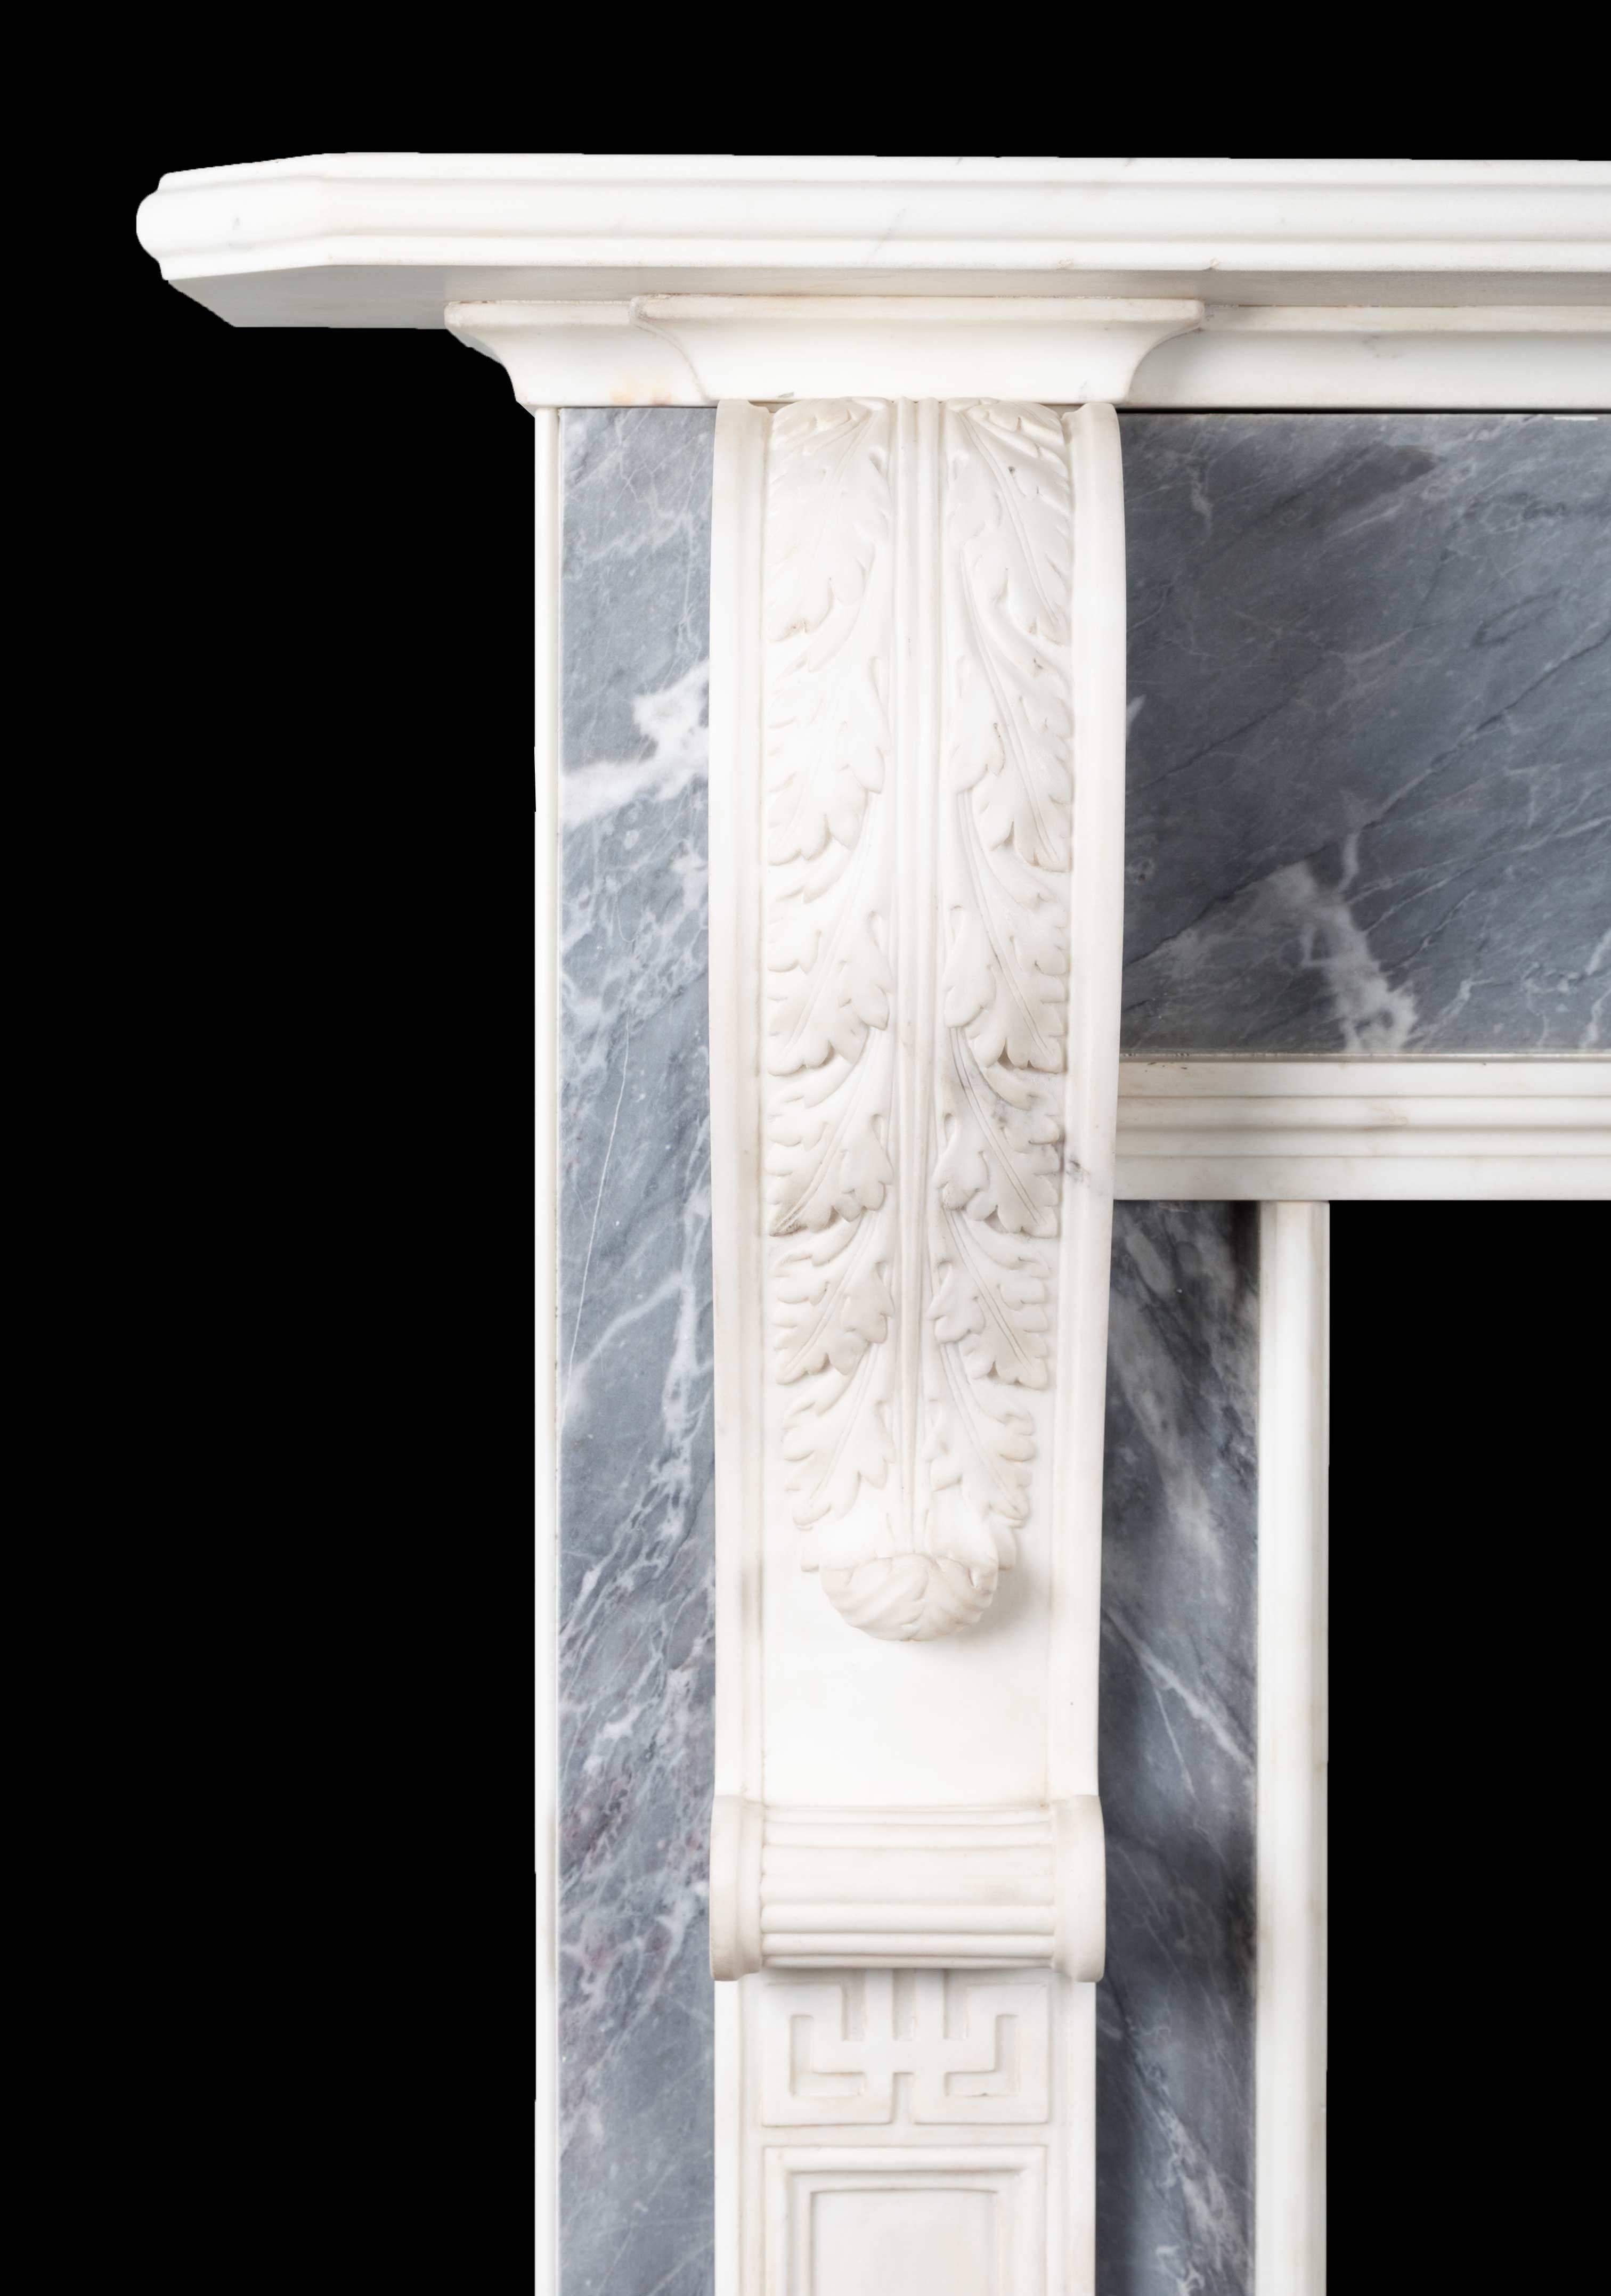 A pair of antique dove grey and white statuary marble fireplaces from the late Georgian period. The long elegant acanthus carved corbels with recessed pilasters below, support a moulded and chamfered edge mantelpiece. The exquisitely carved centre